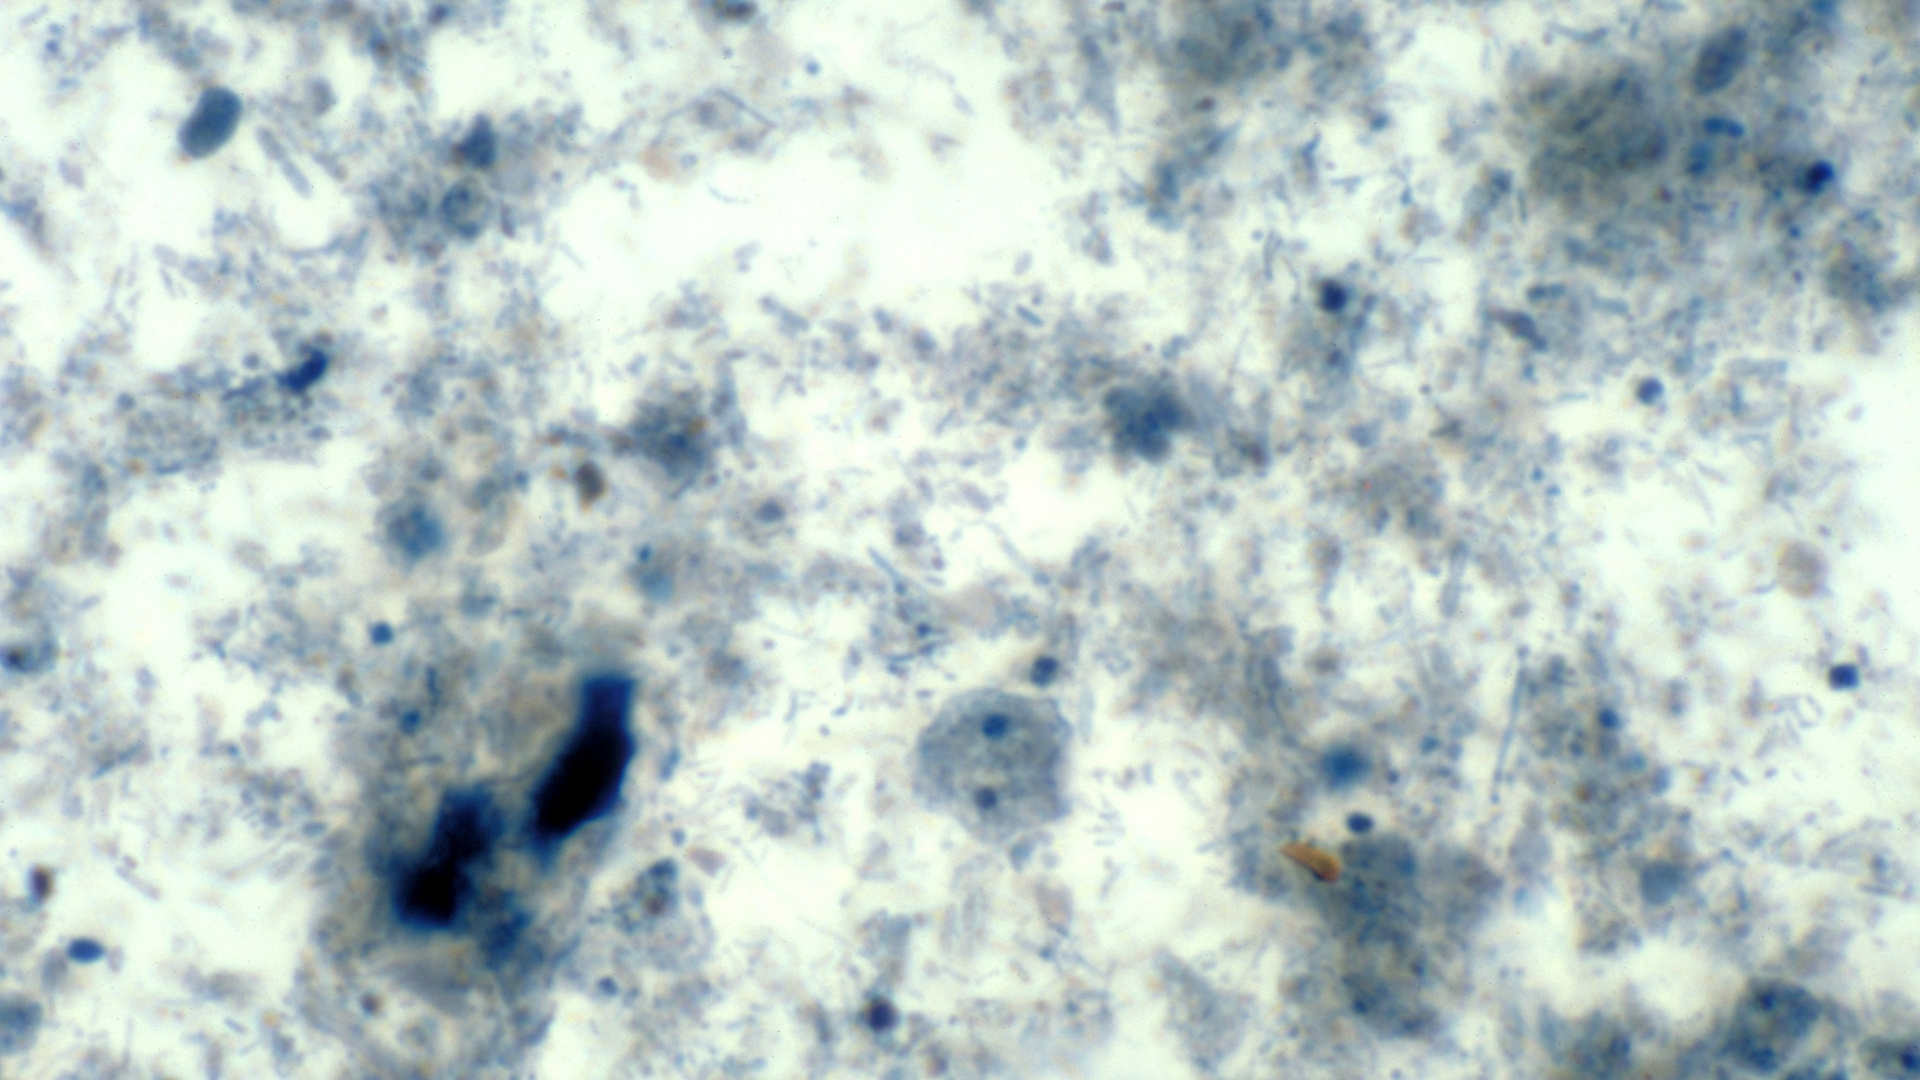 This iron-hematoxylin stained photomicrograph depicts a binucleated amoebic trophozoite of a Dientamoeba fragilis parasite.